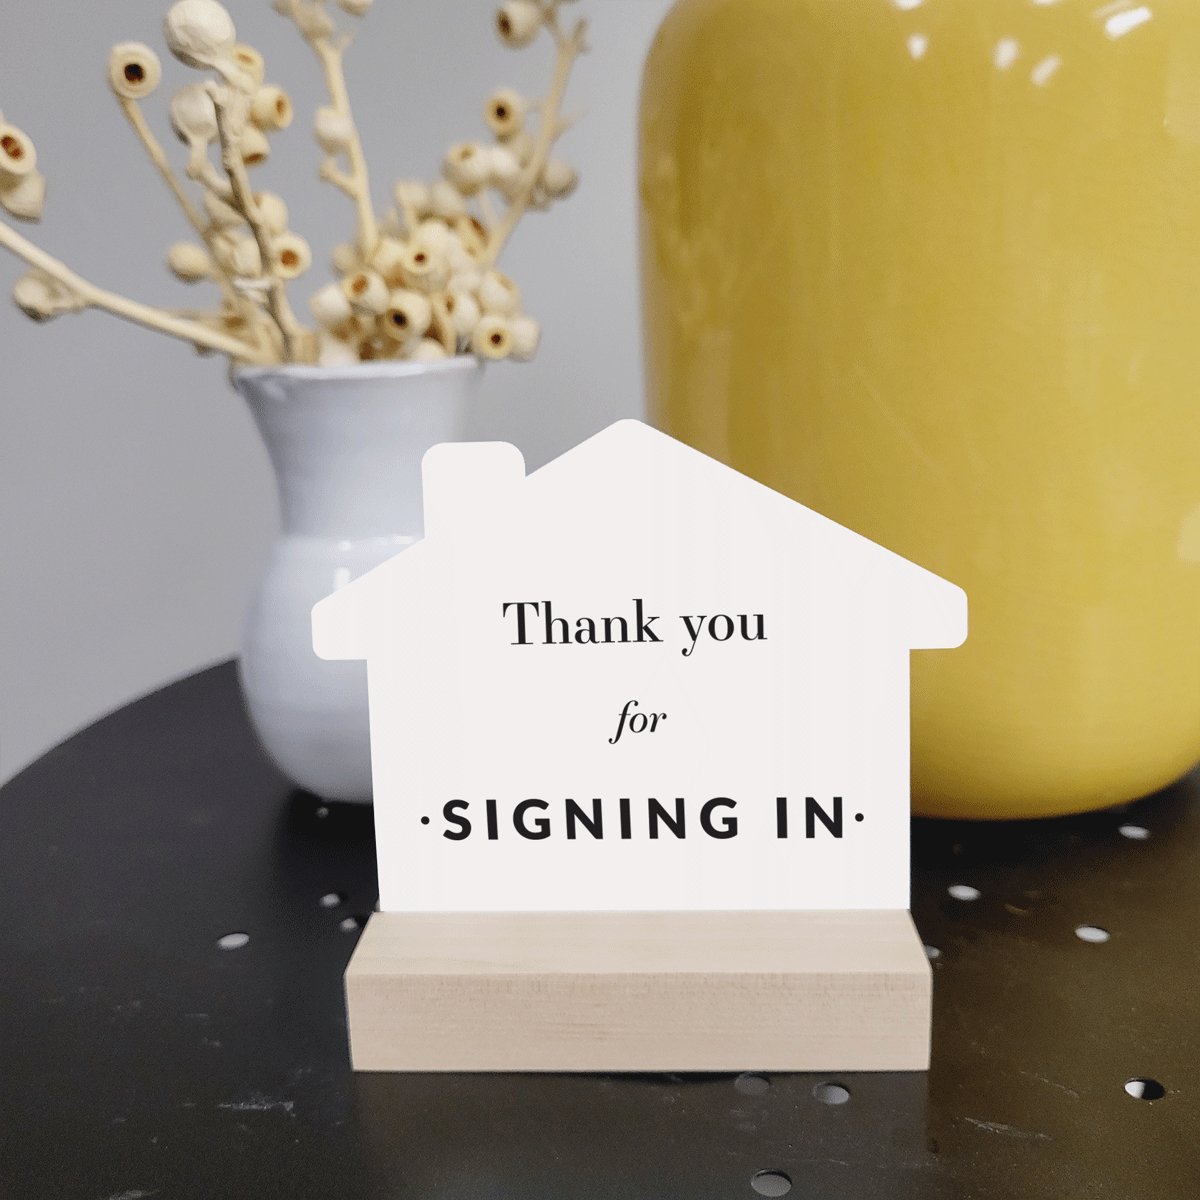 4x4 House - Signing In - All Things Real Estate